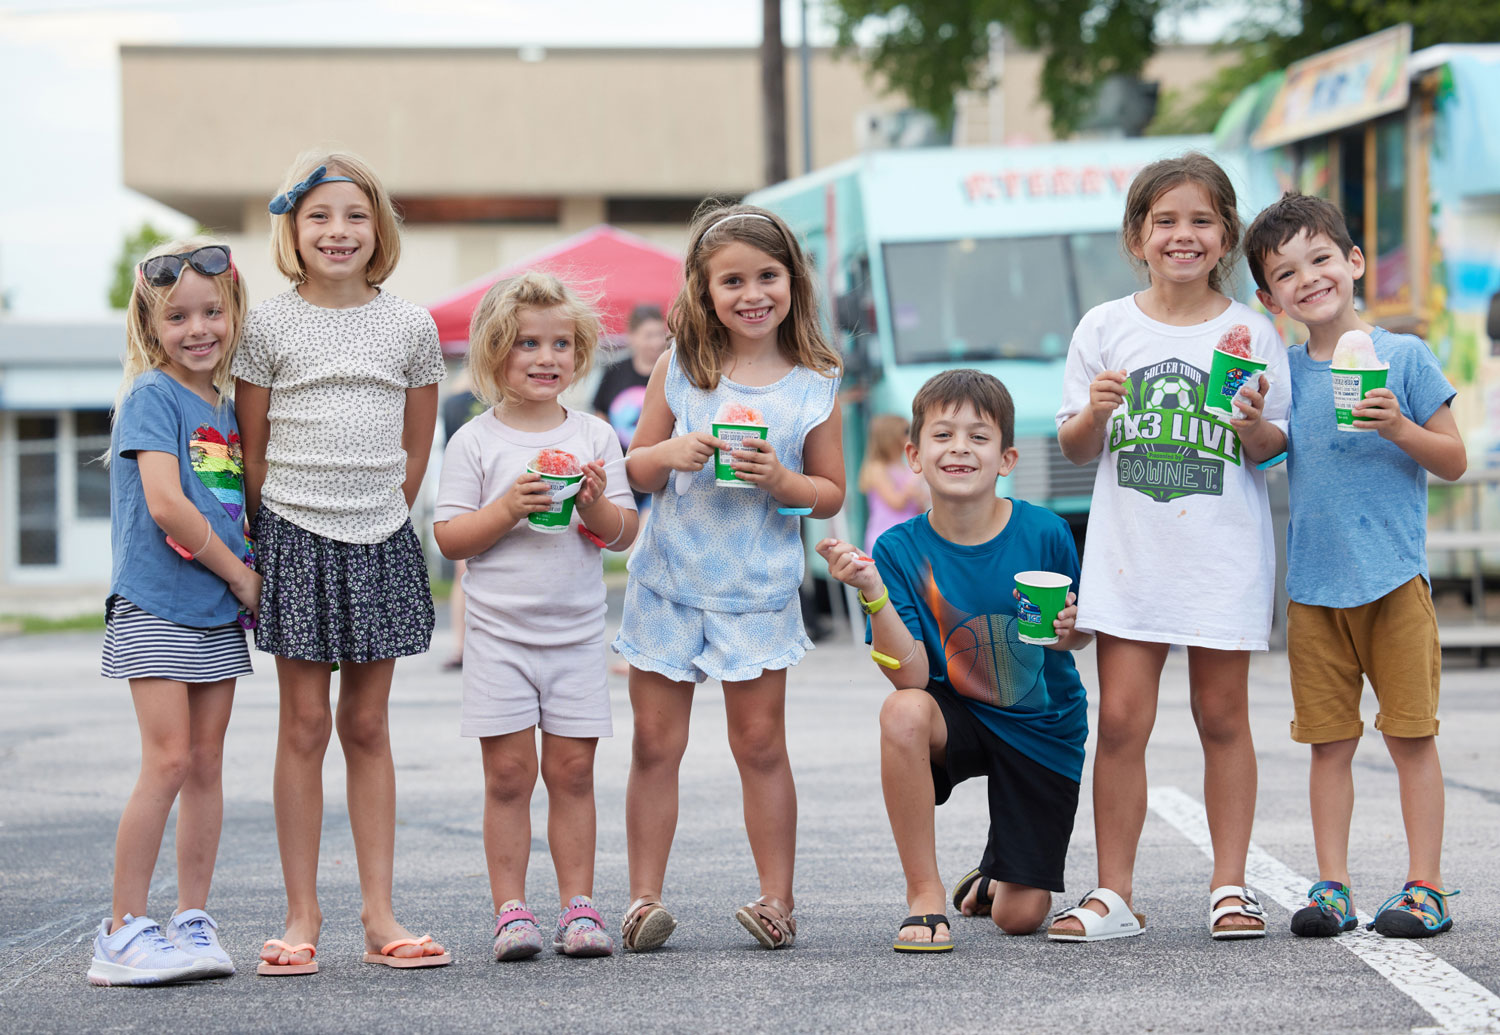 A smiling group of children holding ice creams